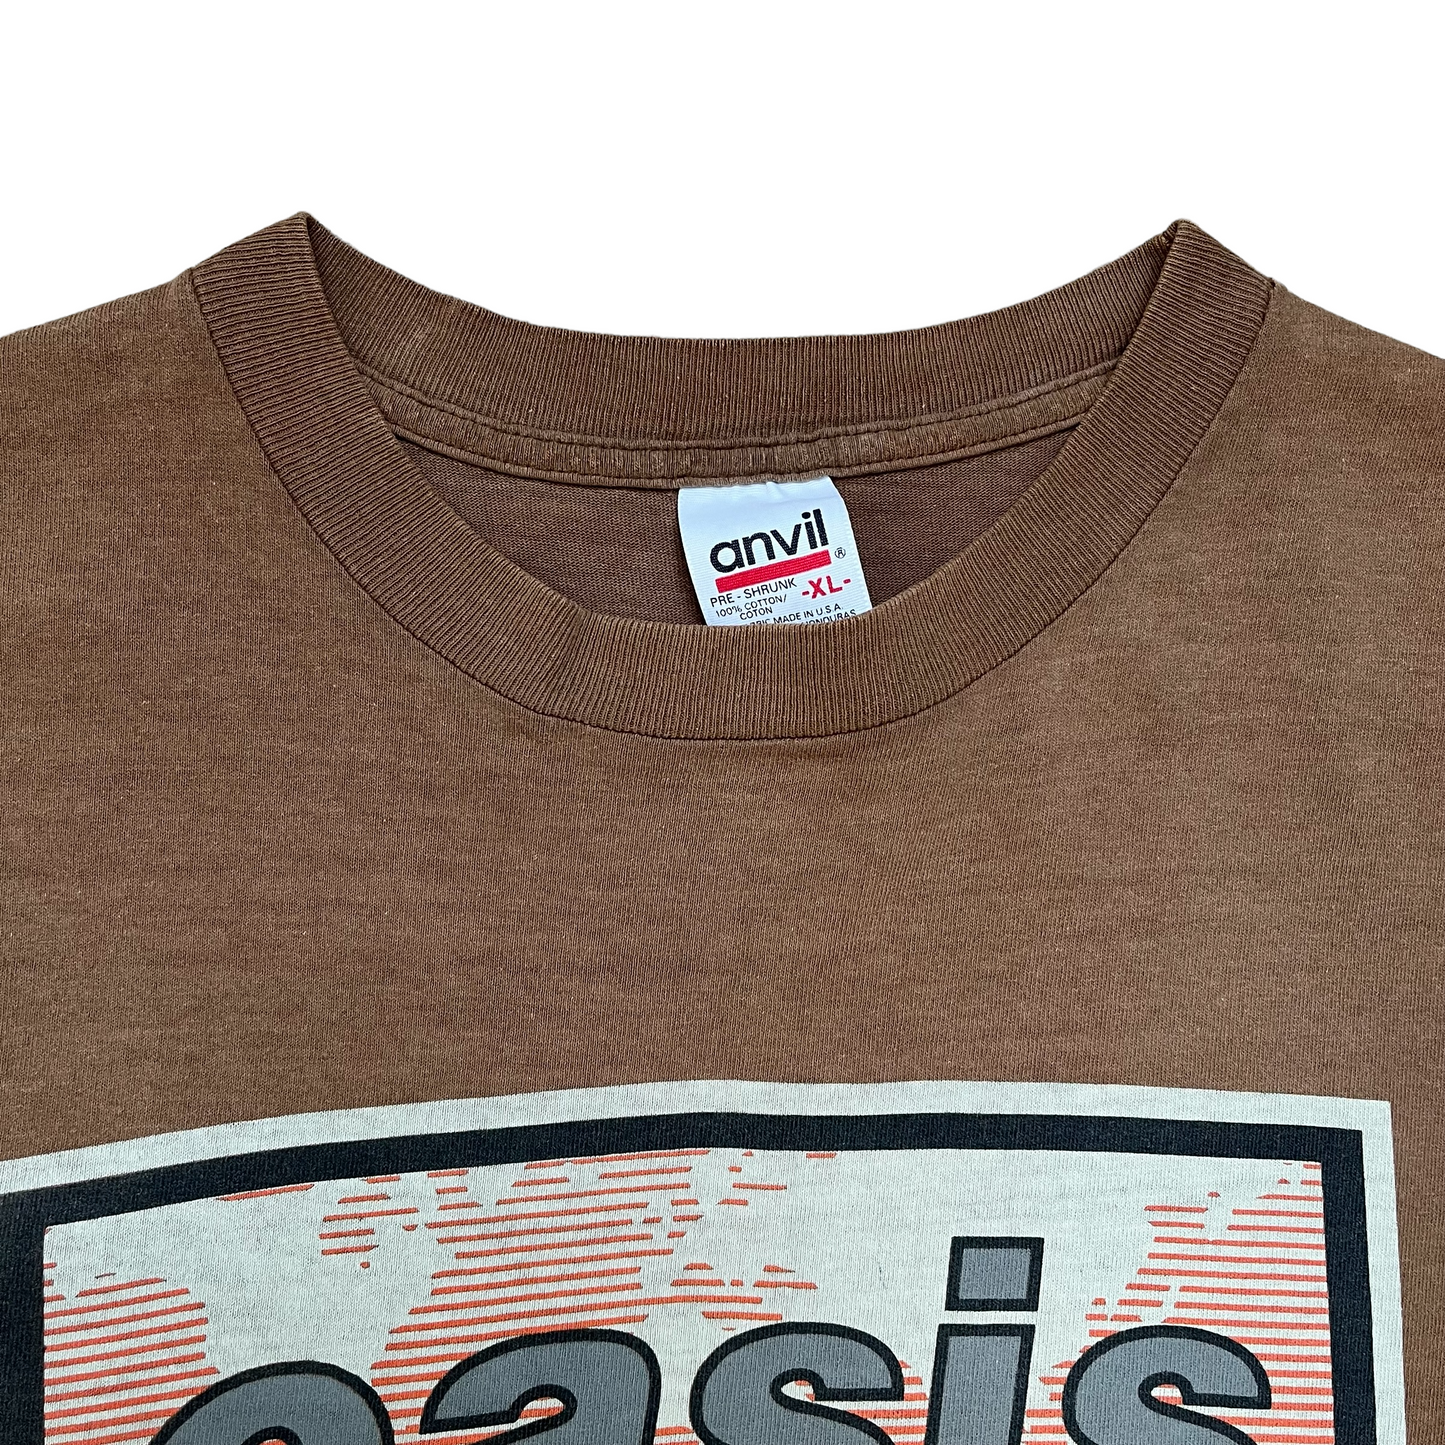 1997 Oasis ‘Be Here Now’ (XL)